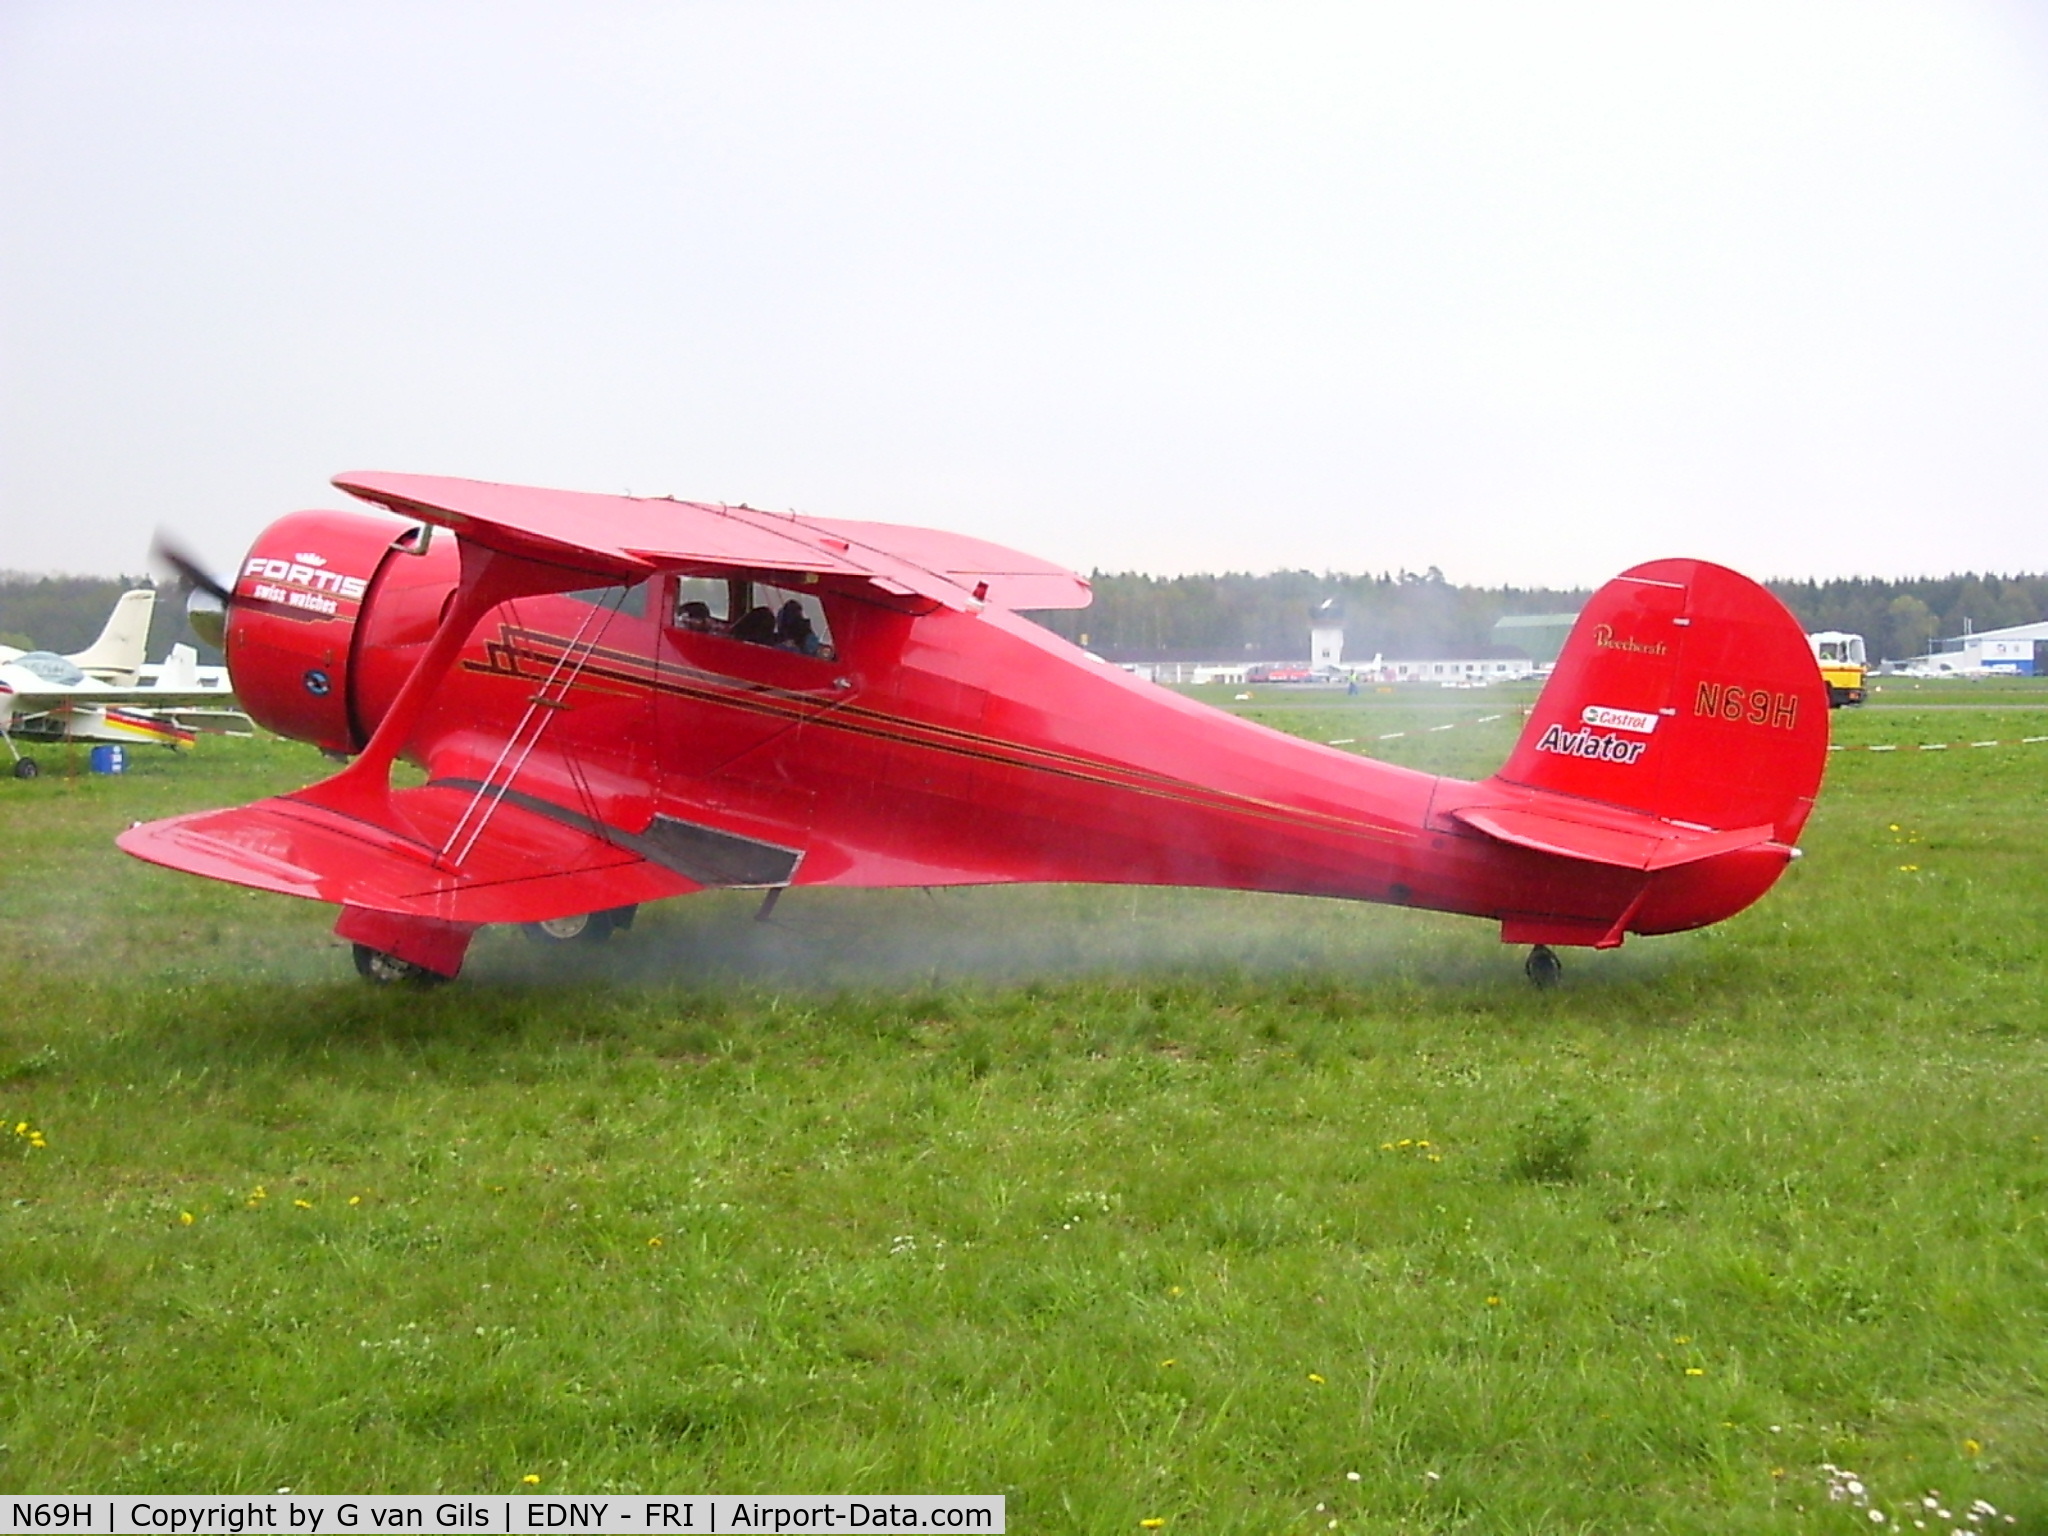 N69H, 1943 Beech D17S Staggerwing C/N 4896, Seen at the Friedrichshaven airshow (april 2005)